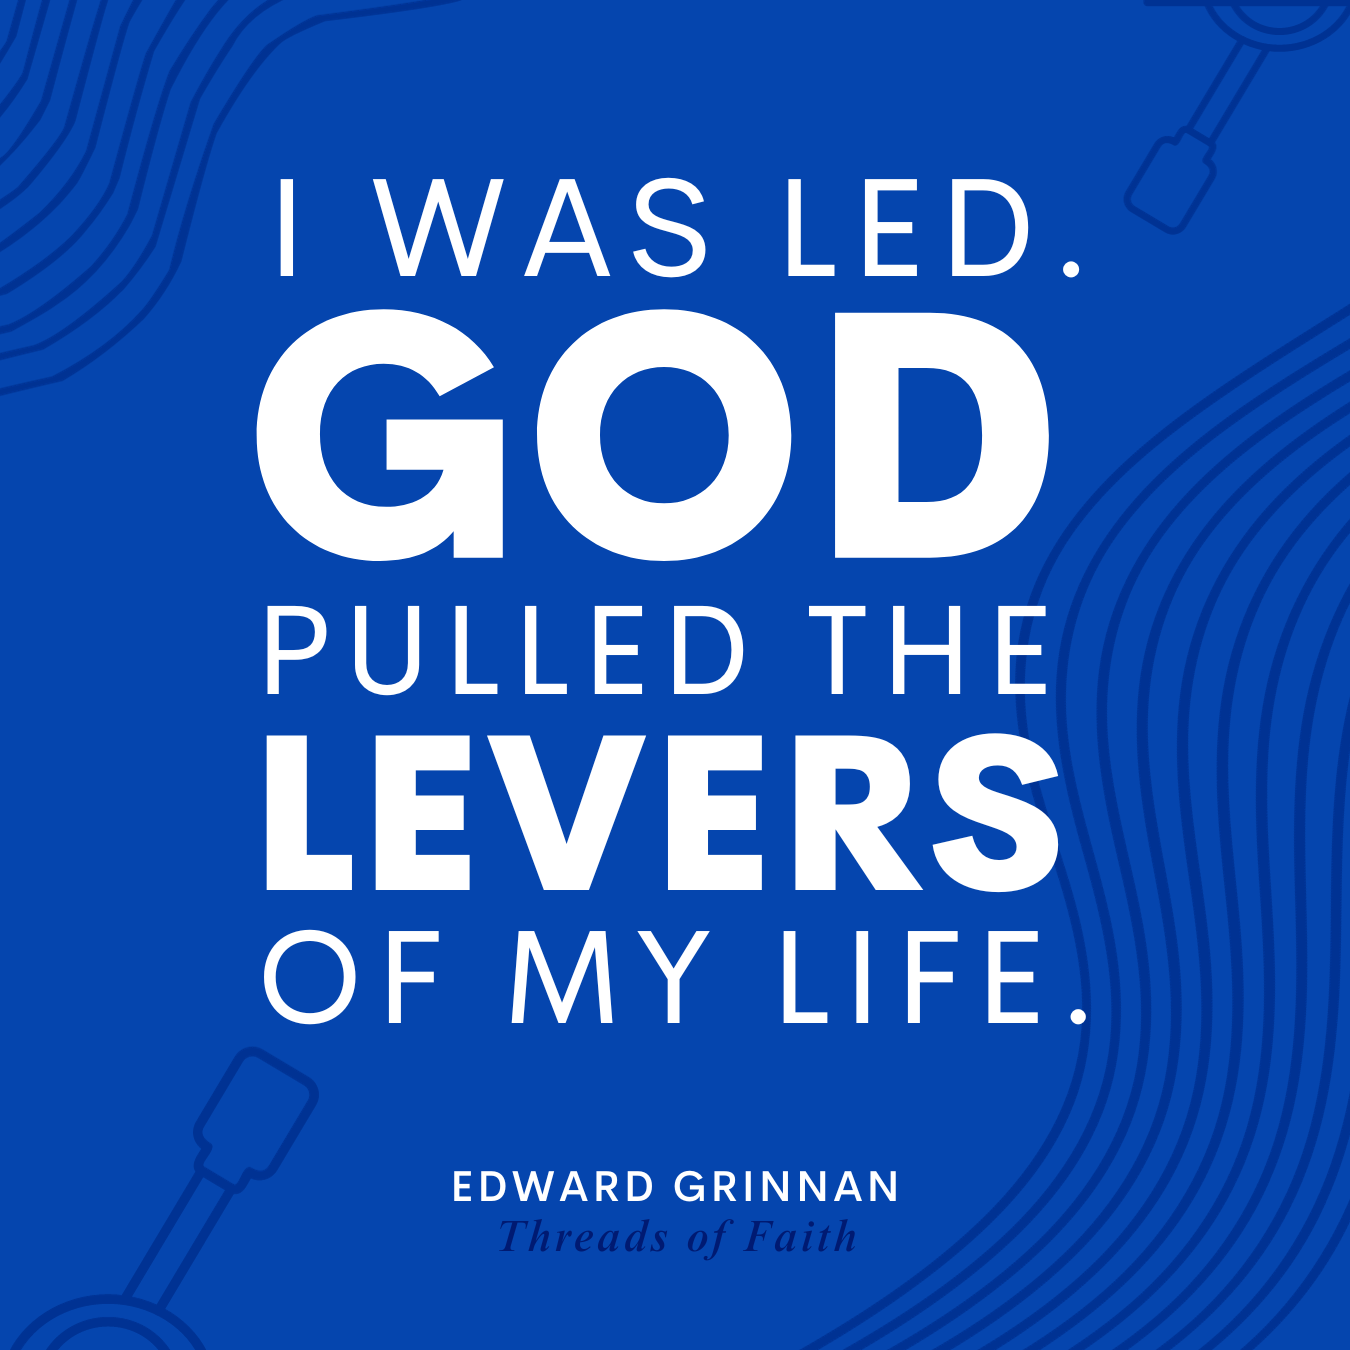 quote about levers from edward grinnan